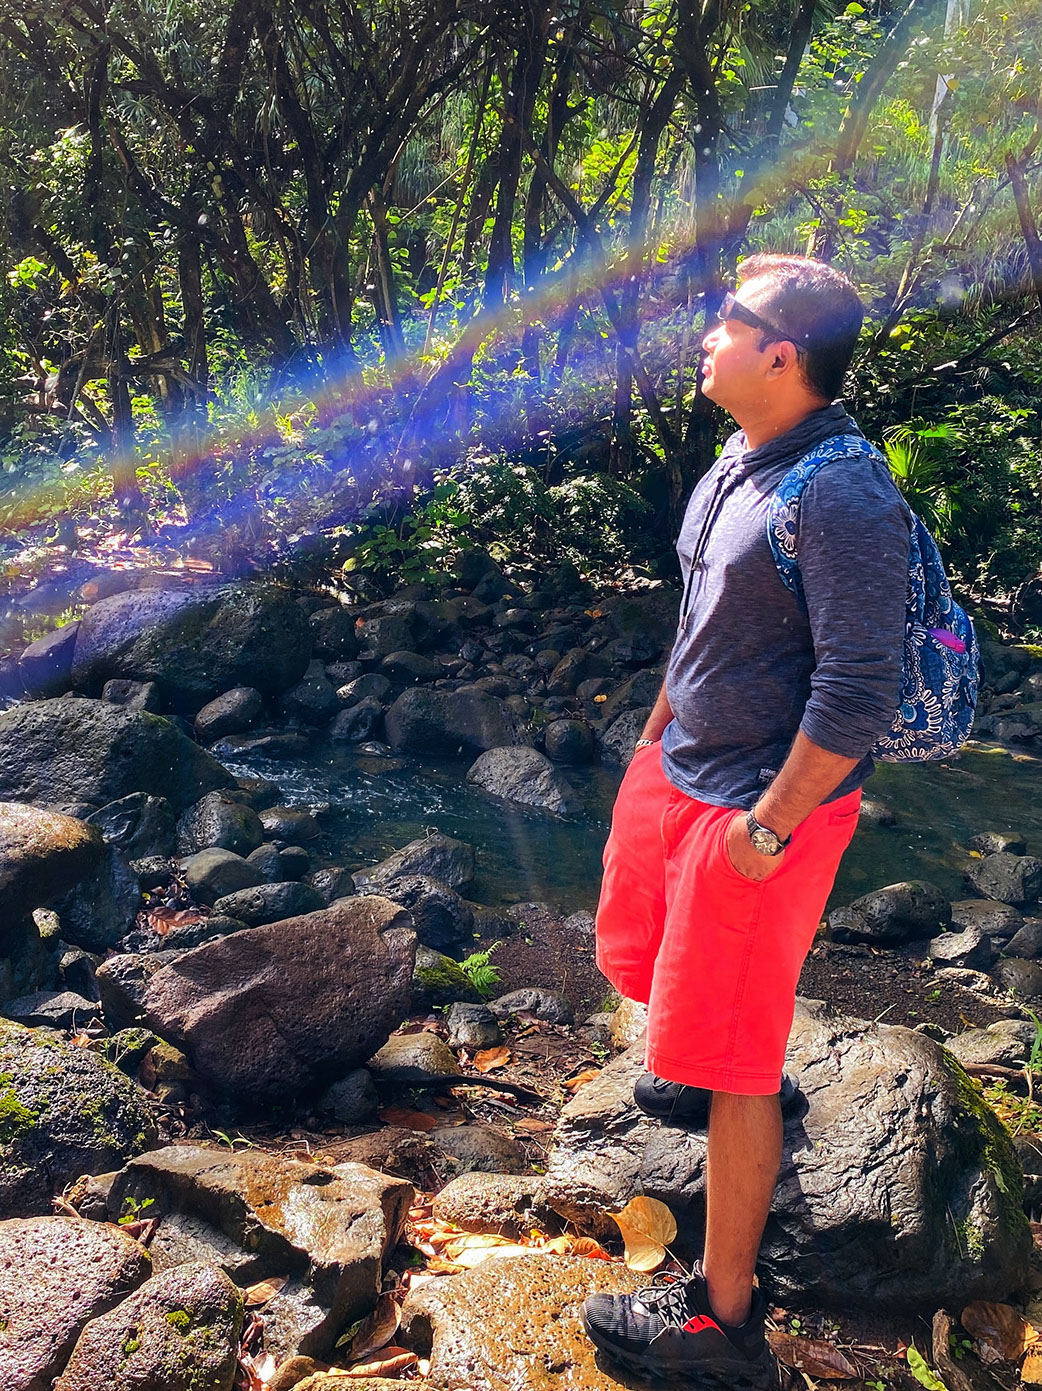 Waimea Valley hike in Hawaii is basking in the exquisite beauty of a rainbow